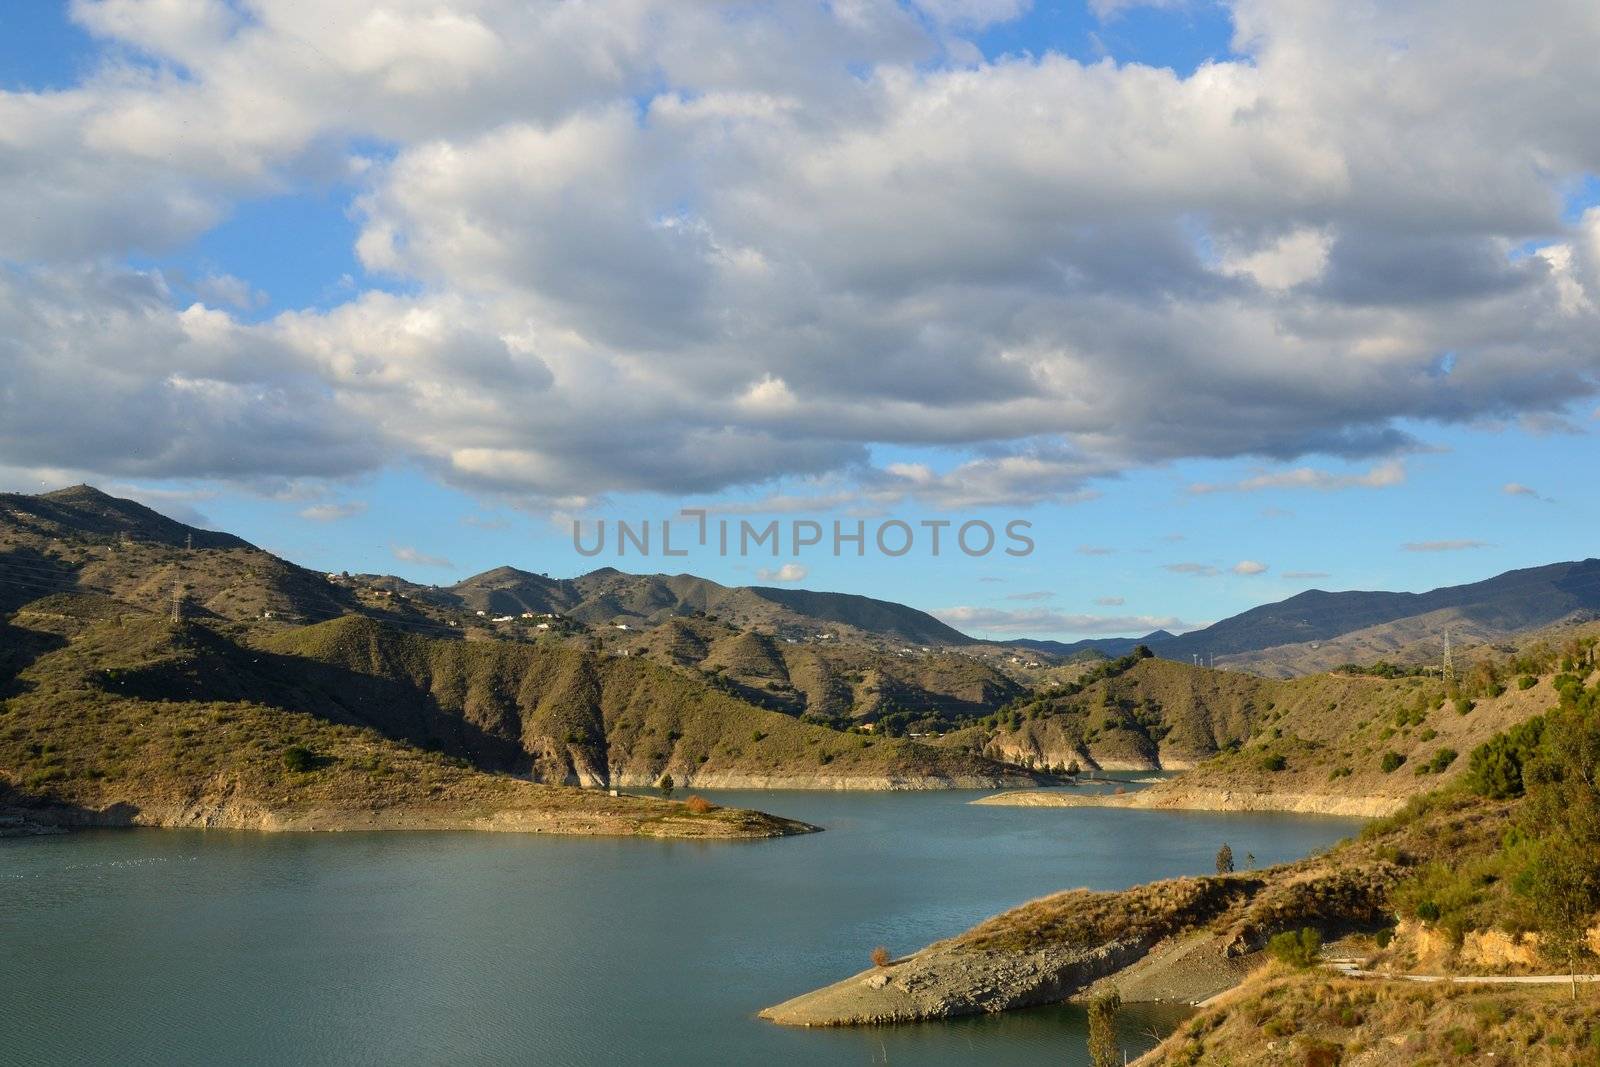 drinking water reservoir for the city of Malaga